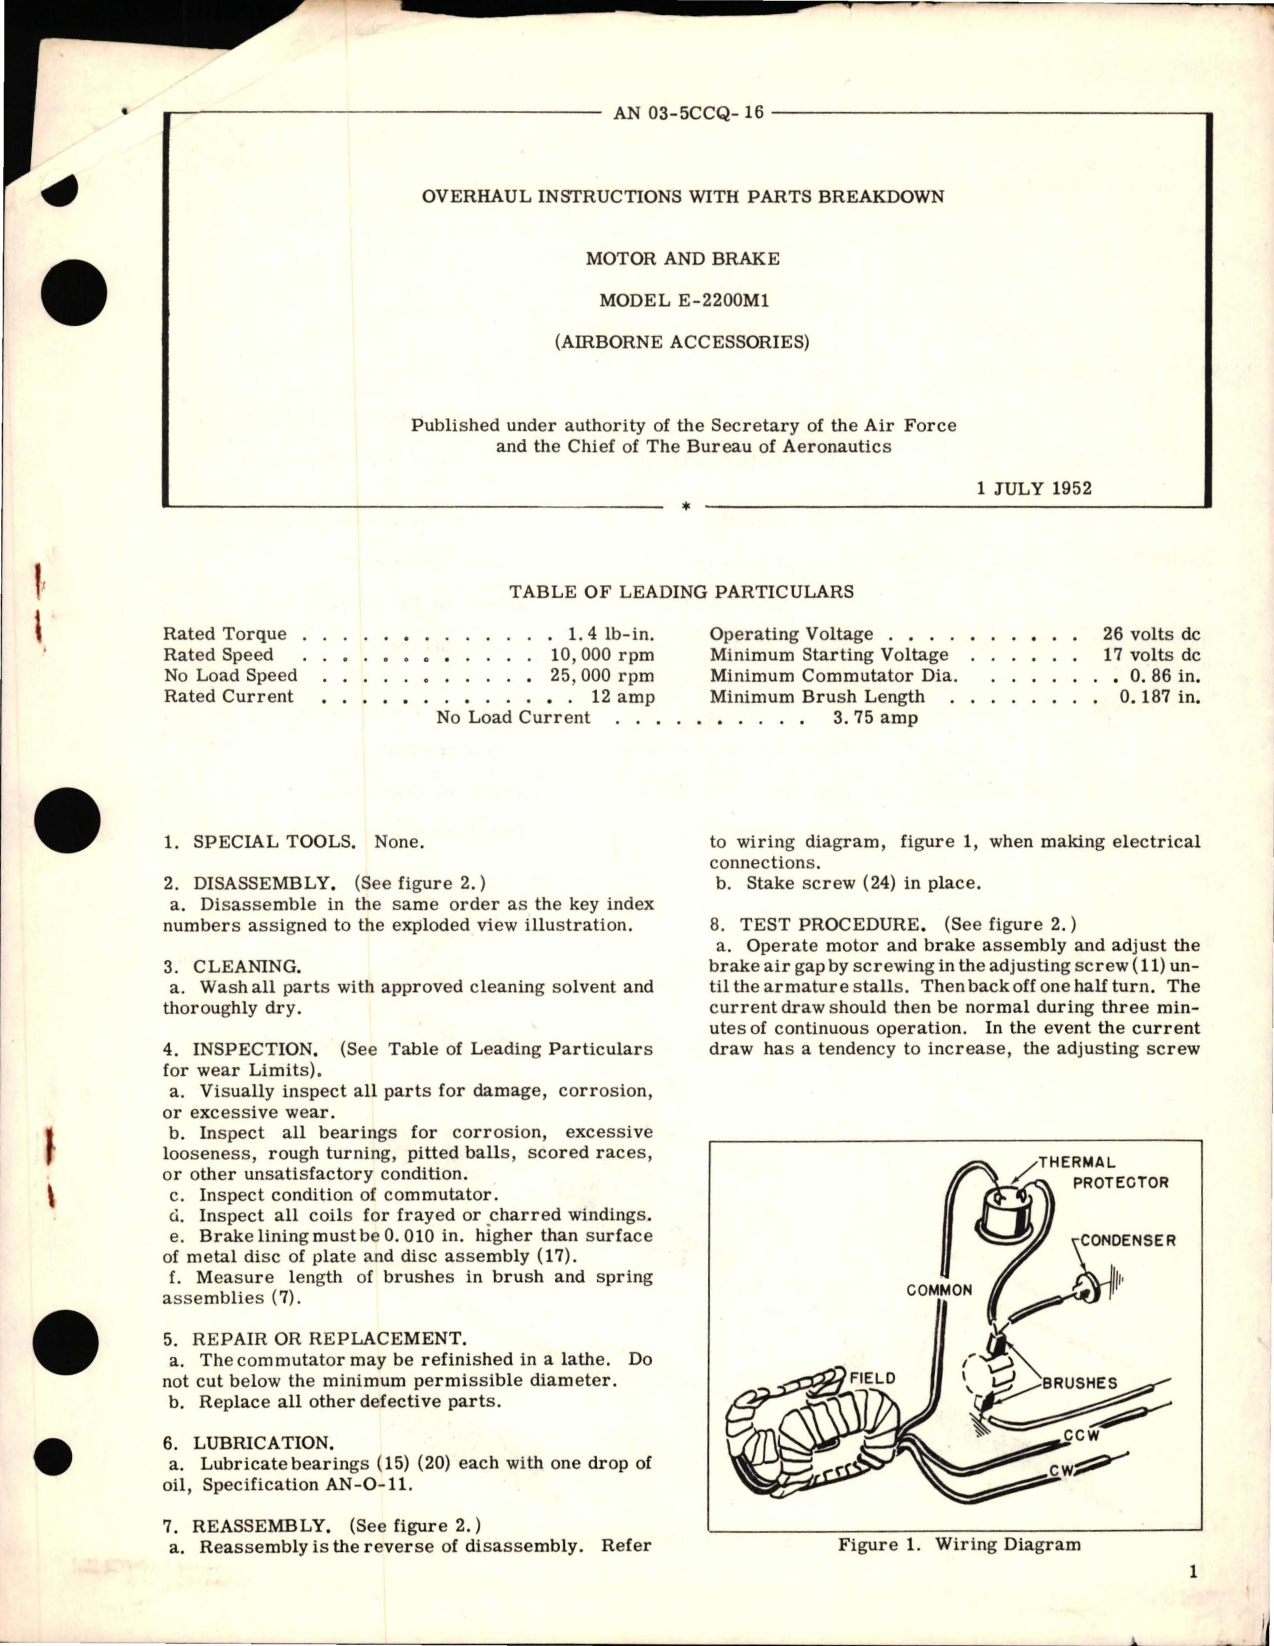 Sample page 1 from AirCorps Library document: Overhaul Instructions with Parts Breakdown for Motor and Brake - Model E-2200M1